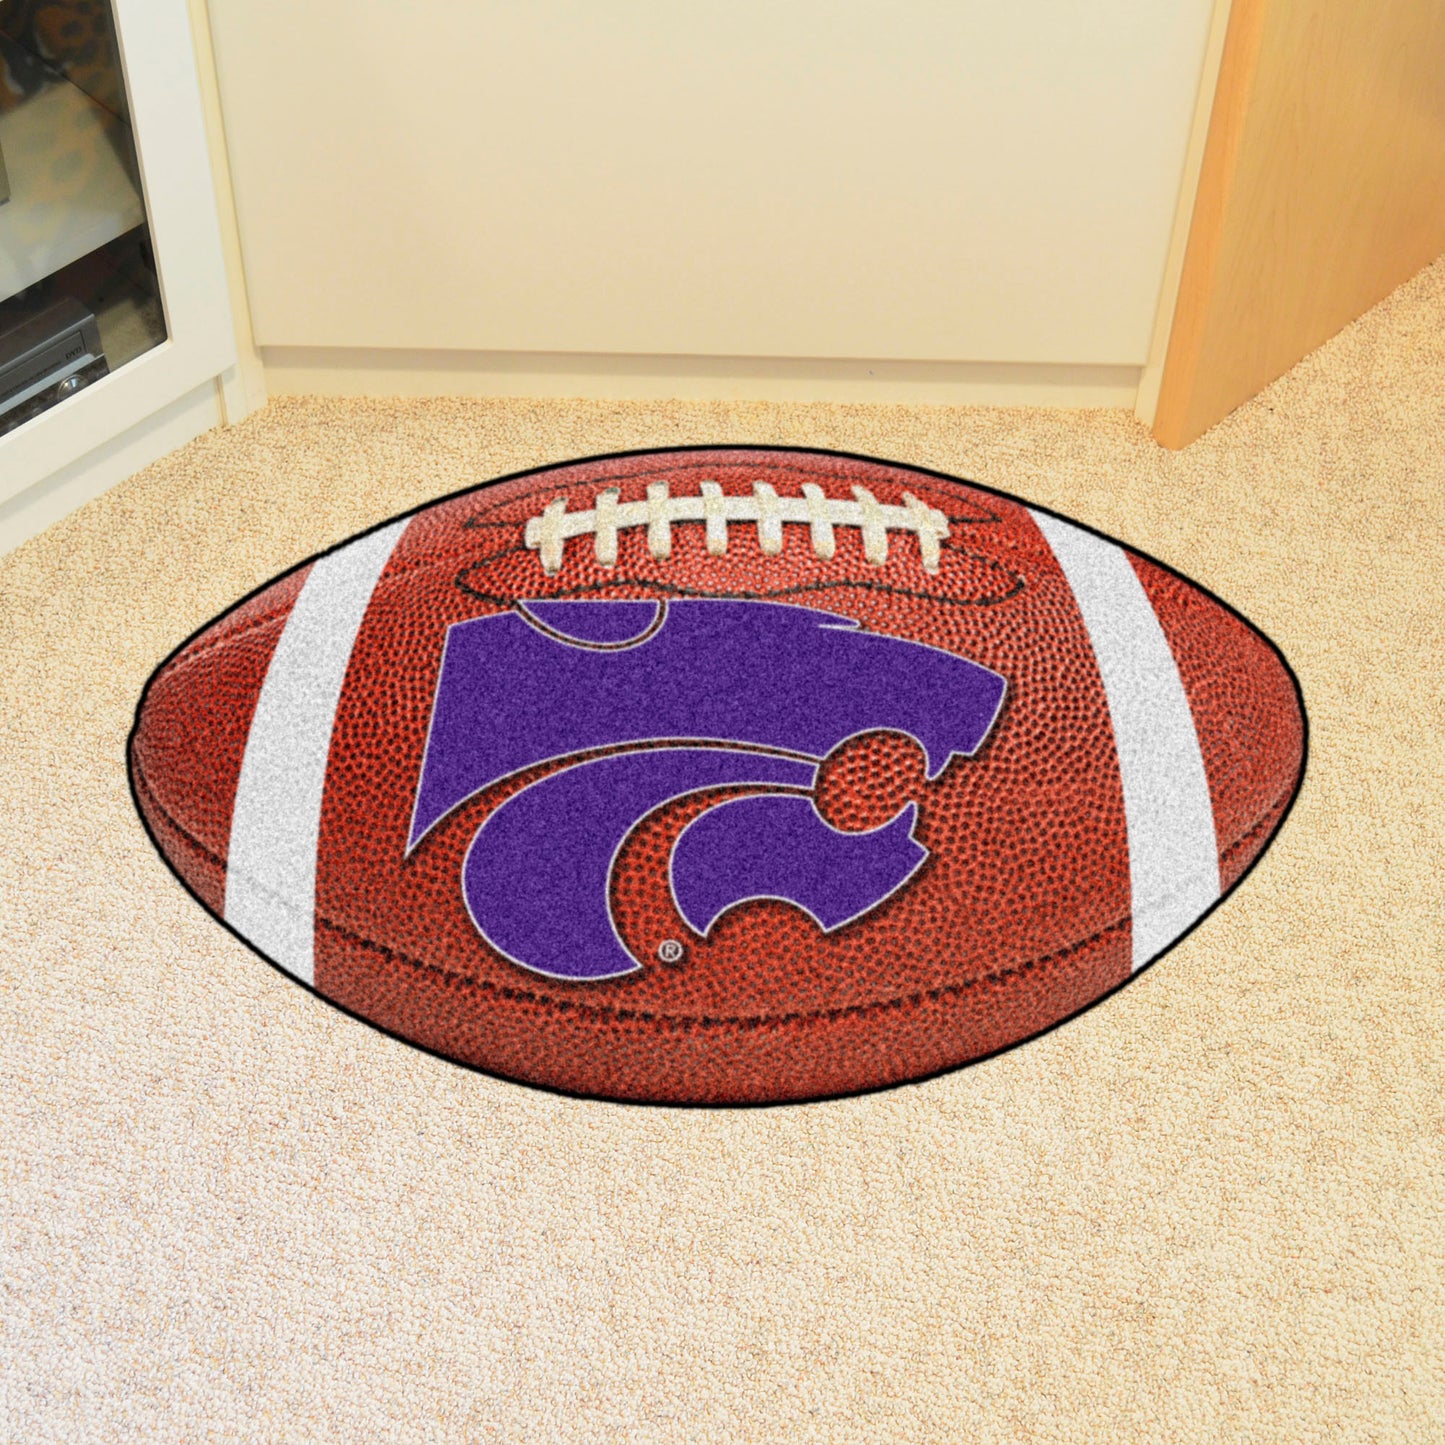 Kansas State Wildcats Football Rug - 20.5in. x 32.5in.